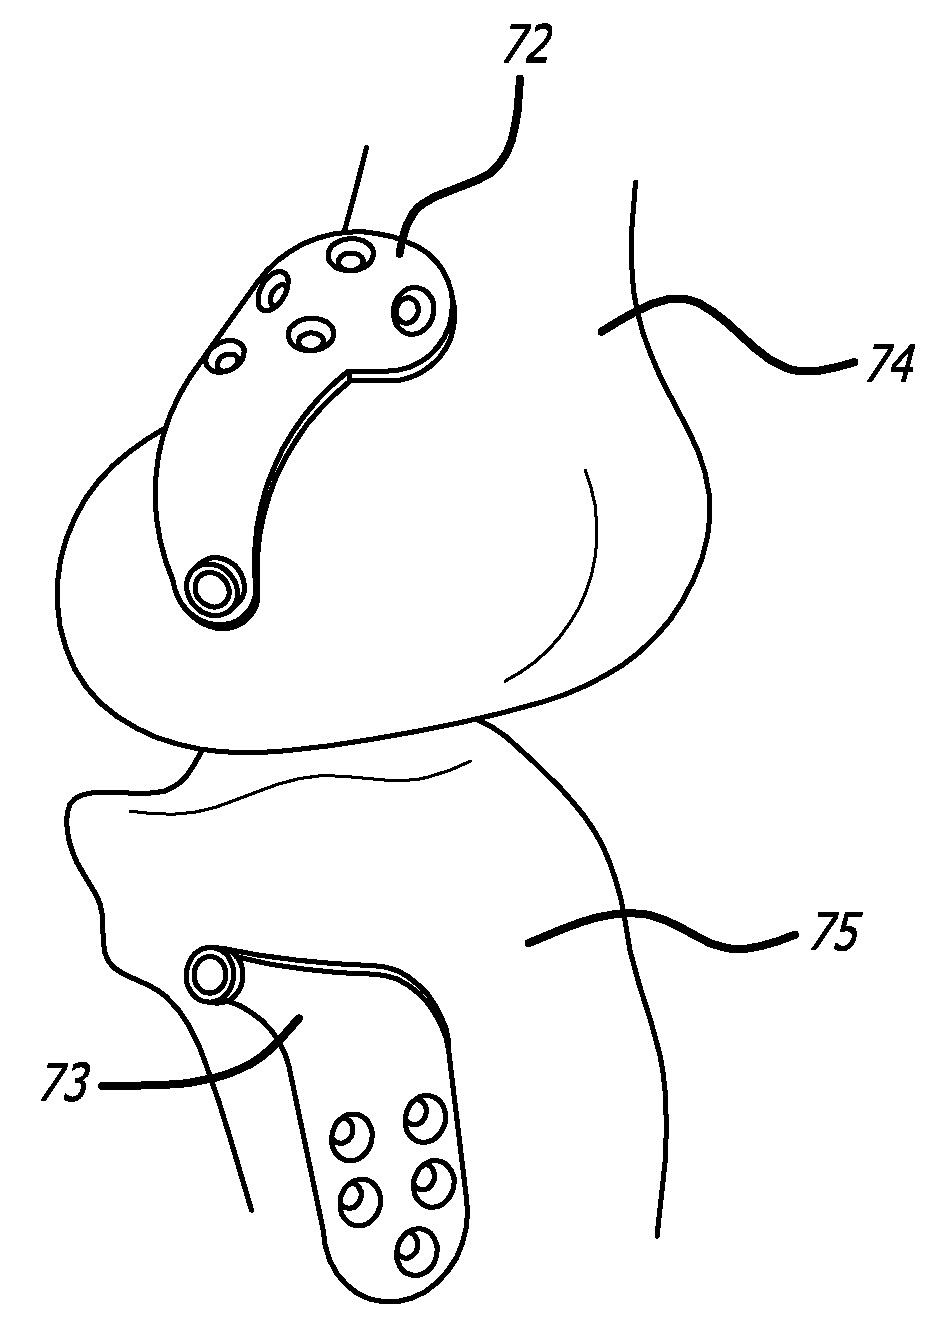 Extra-articular implantable mechanical energy absorbing systems and implantation method